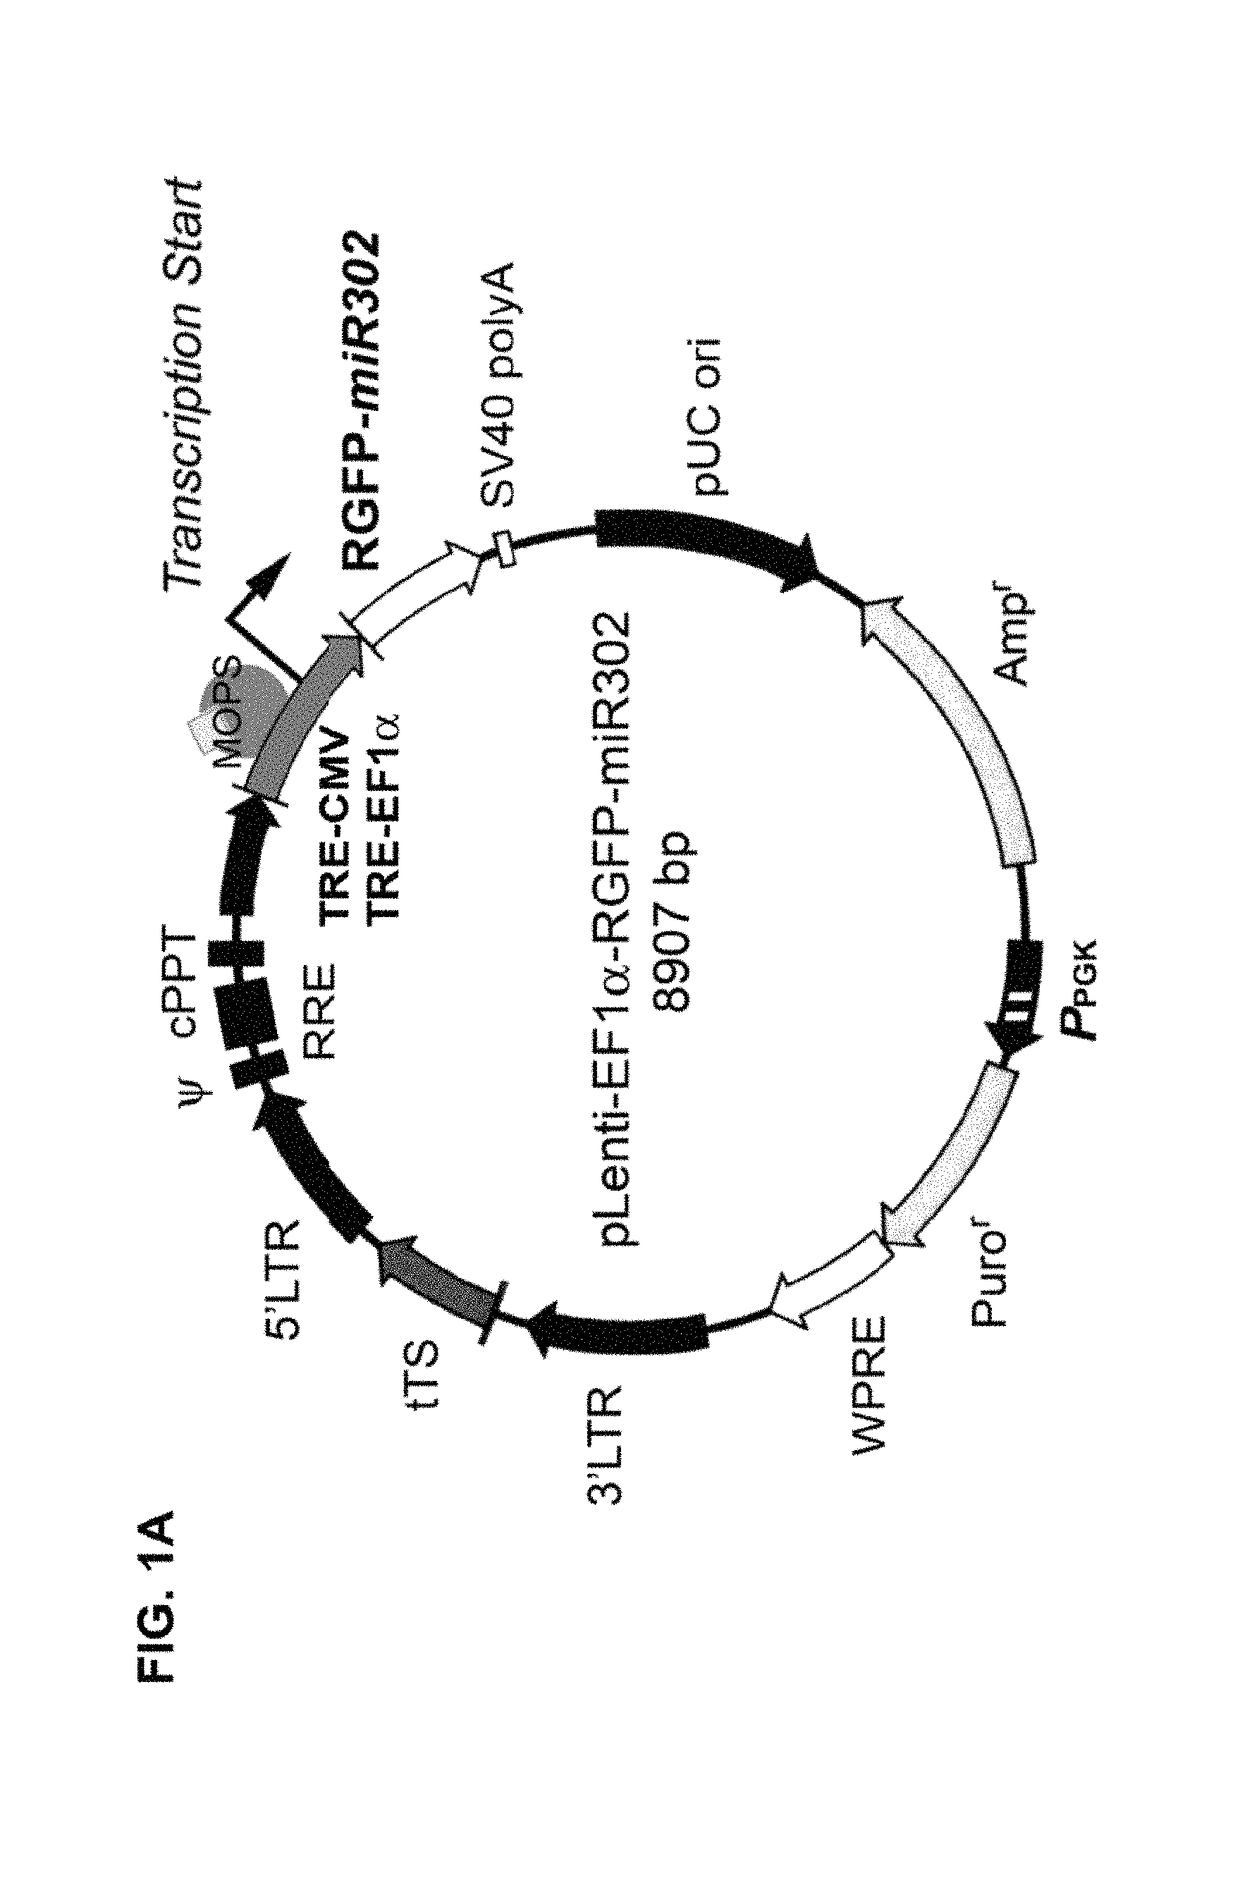 Composition for producing microRNA precursors as drugs for enhancing wound healing and production method of the microRNA precursors